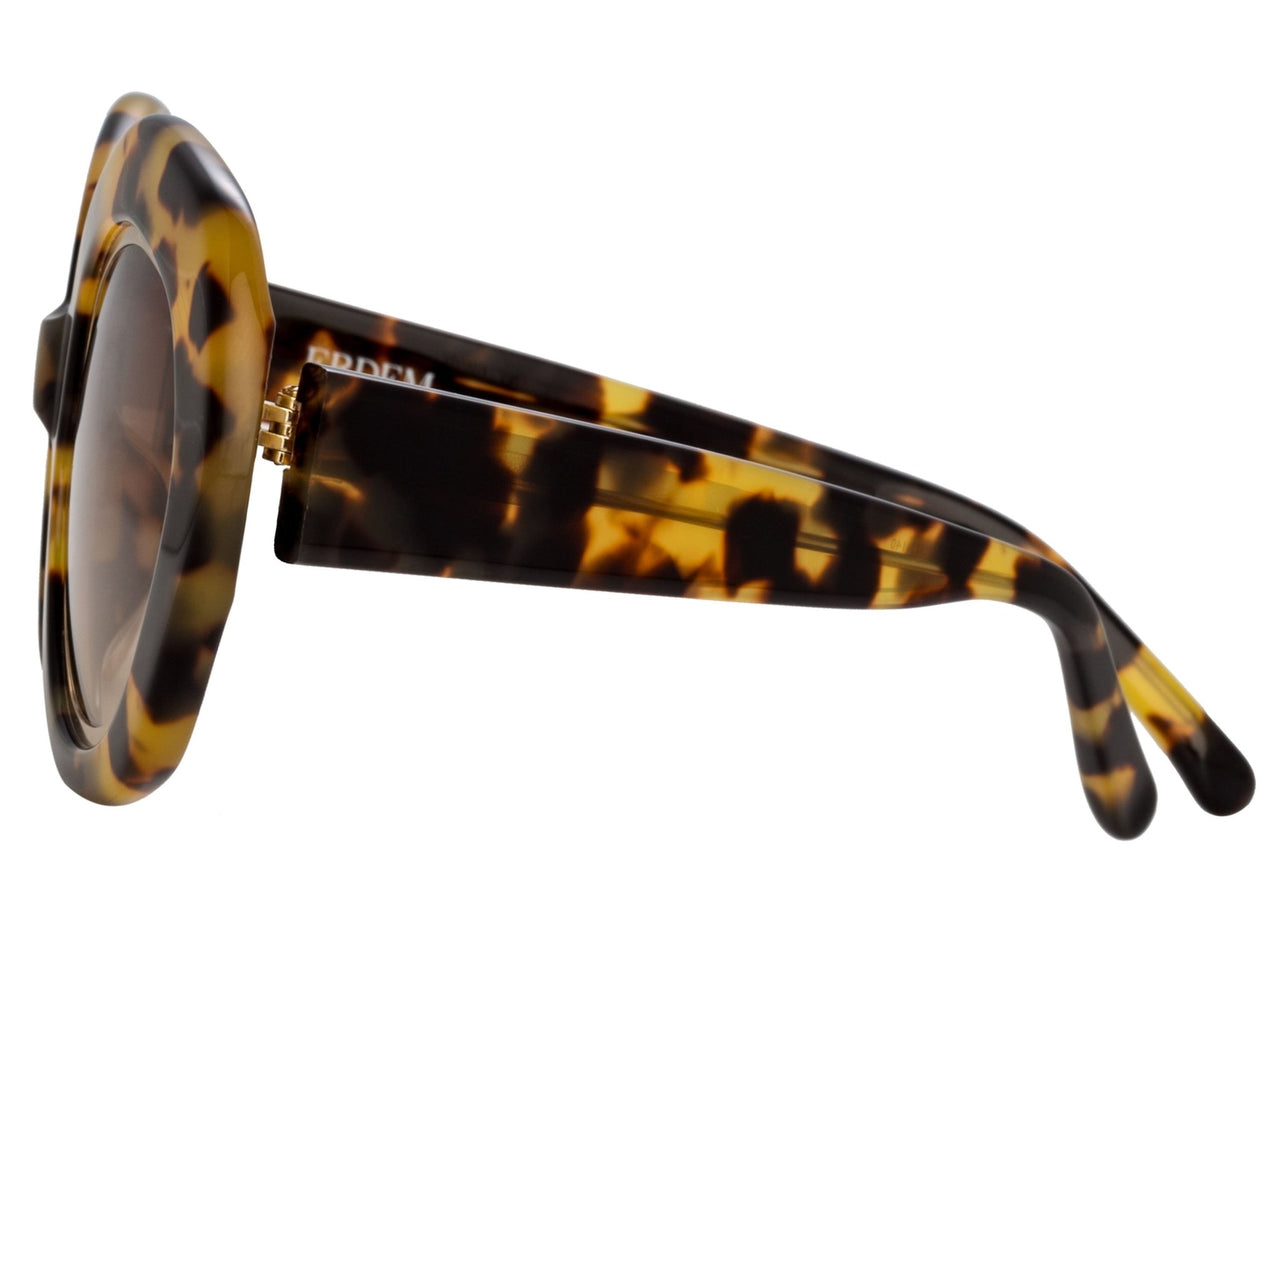 Erdem Women Sunglasses Oversized Tortoise Shell Gold with Brown Graduated Lenses EDM33C4SUN - Watches & Crystals